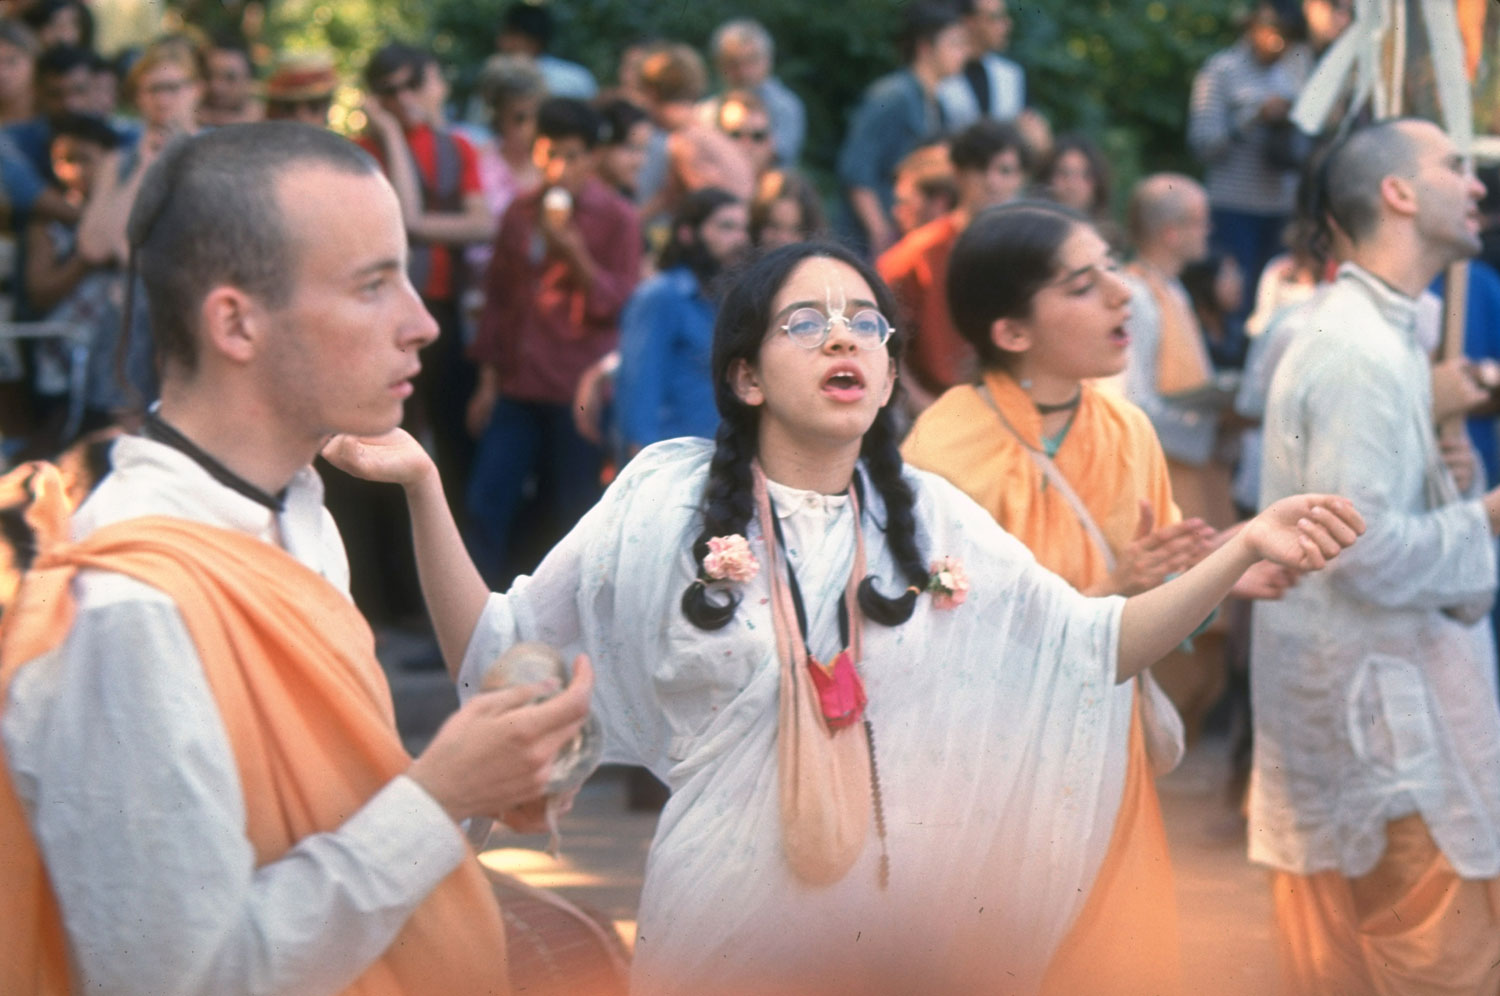 Hare Krishna devotees wear traditional saffron robes and chant in a New York park, summer 1969.